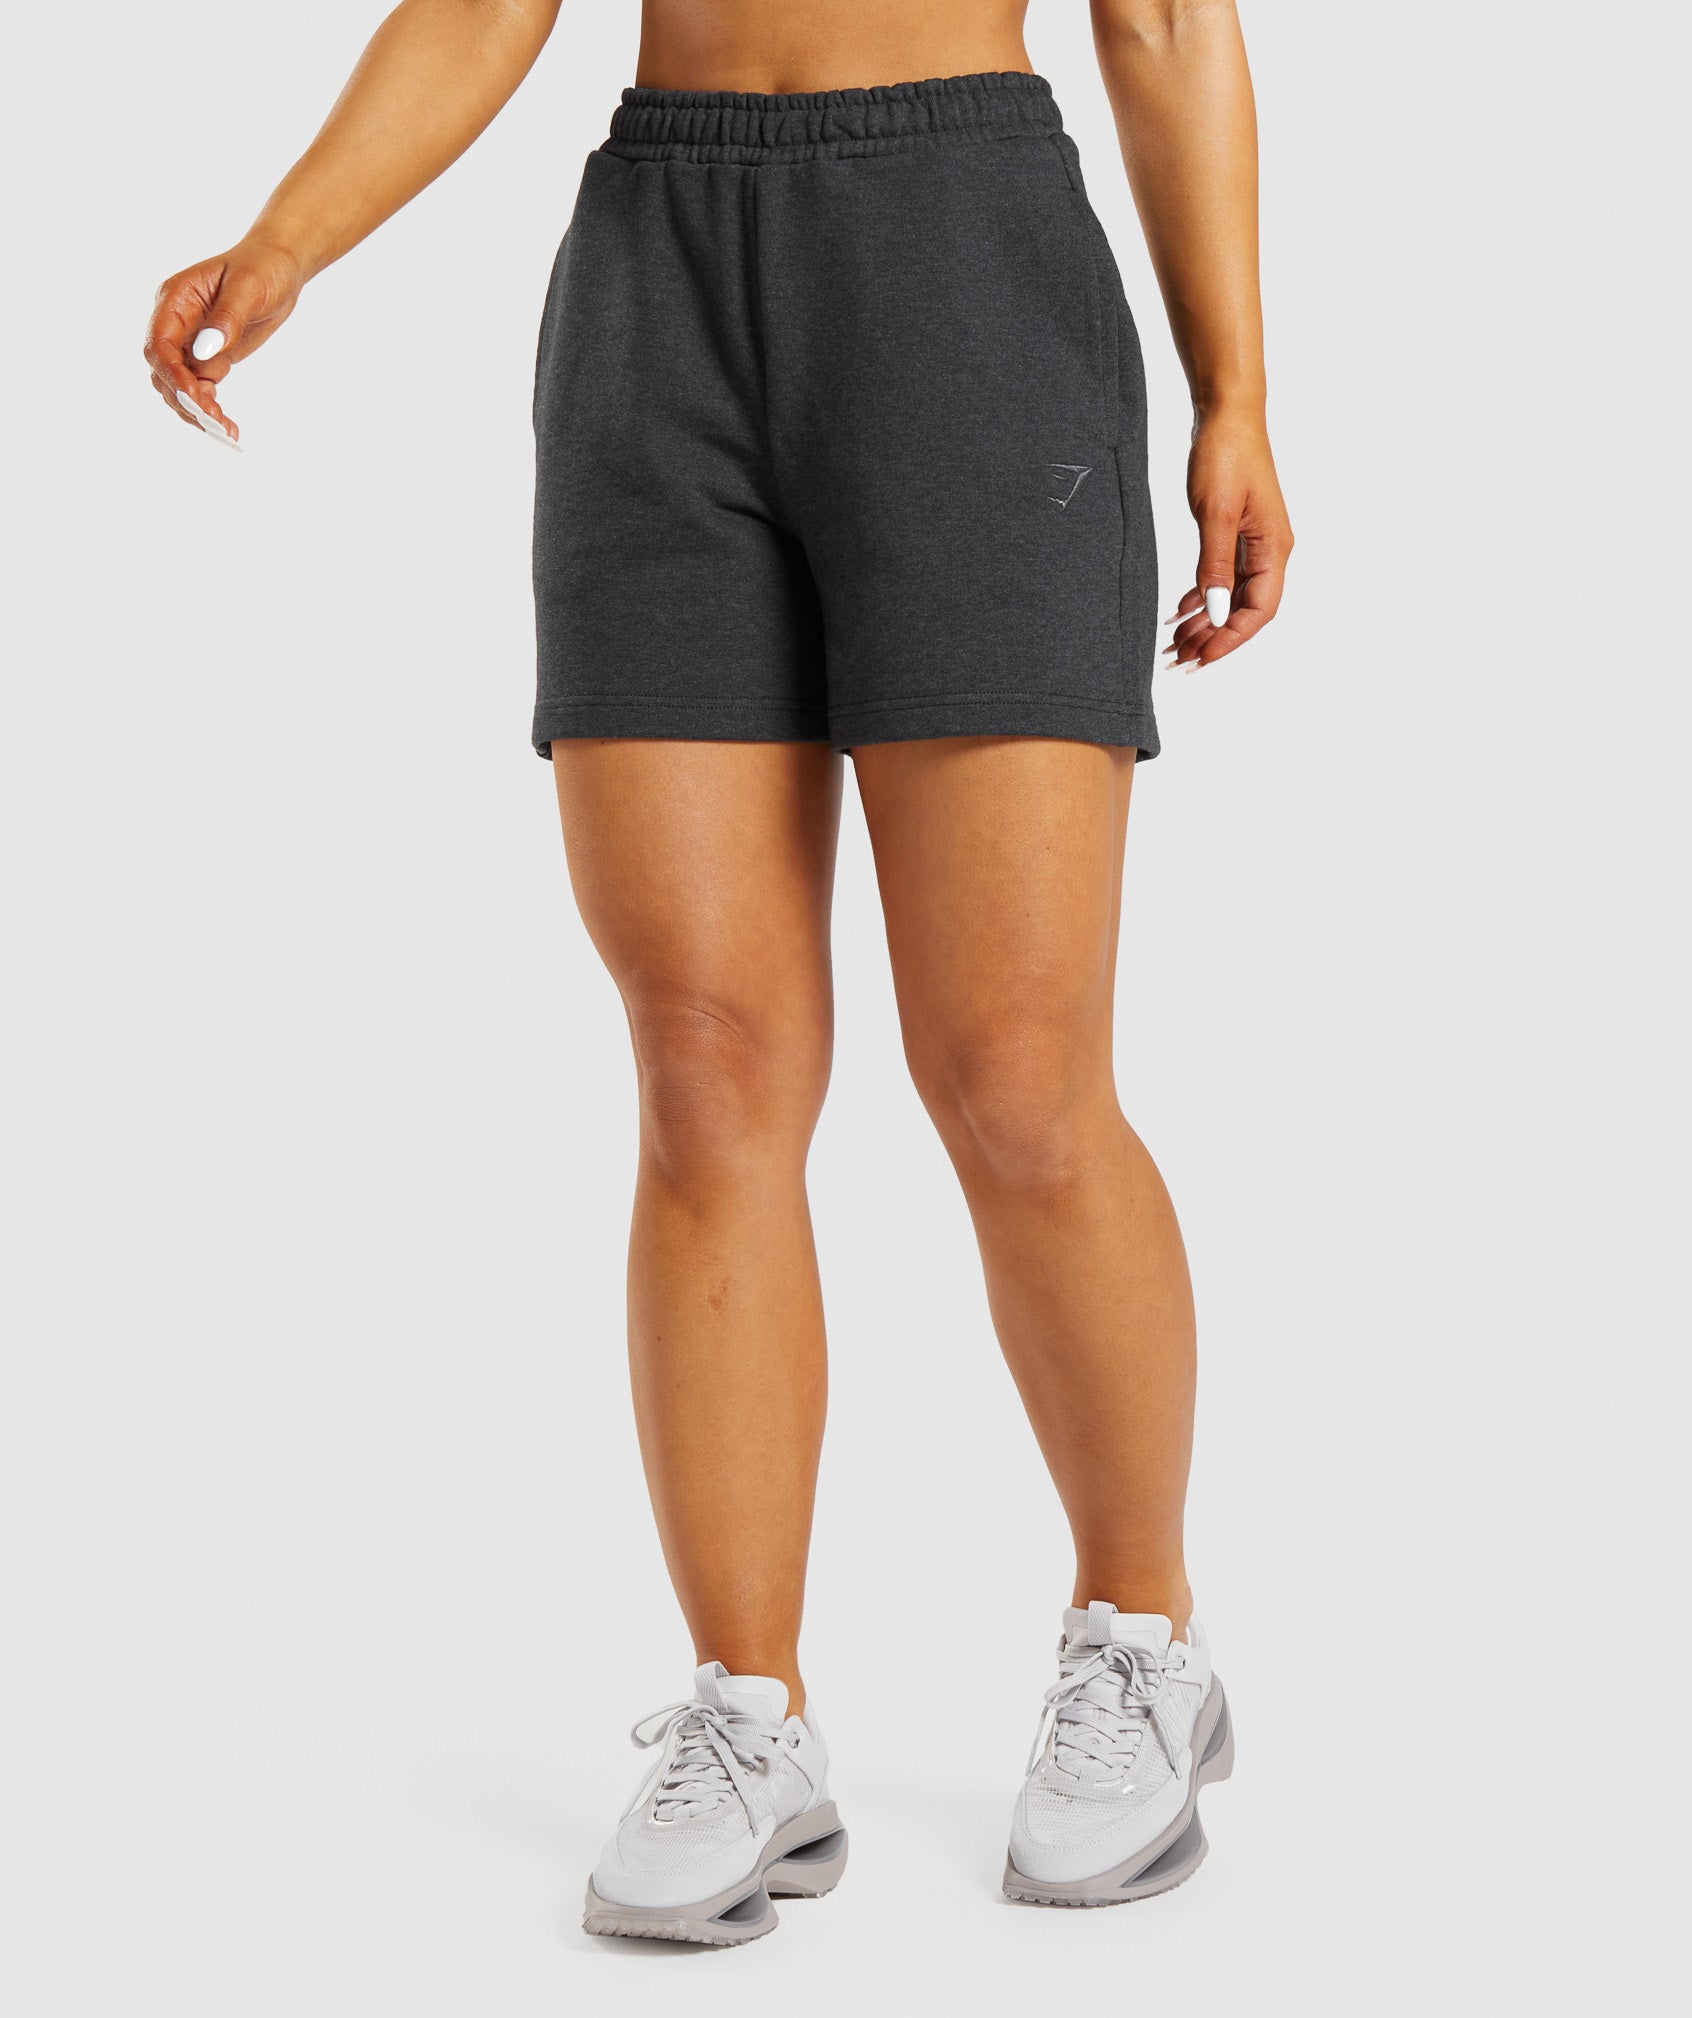 Rest Day Sweats Shorts in Black Core Marl